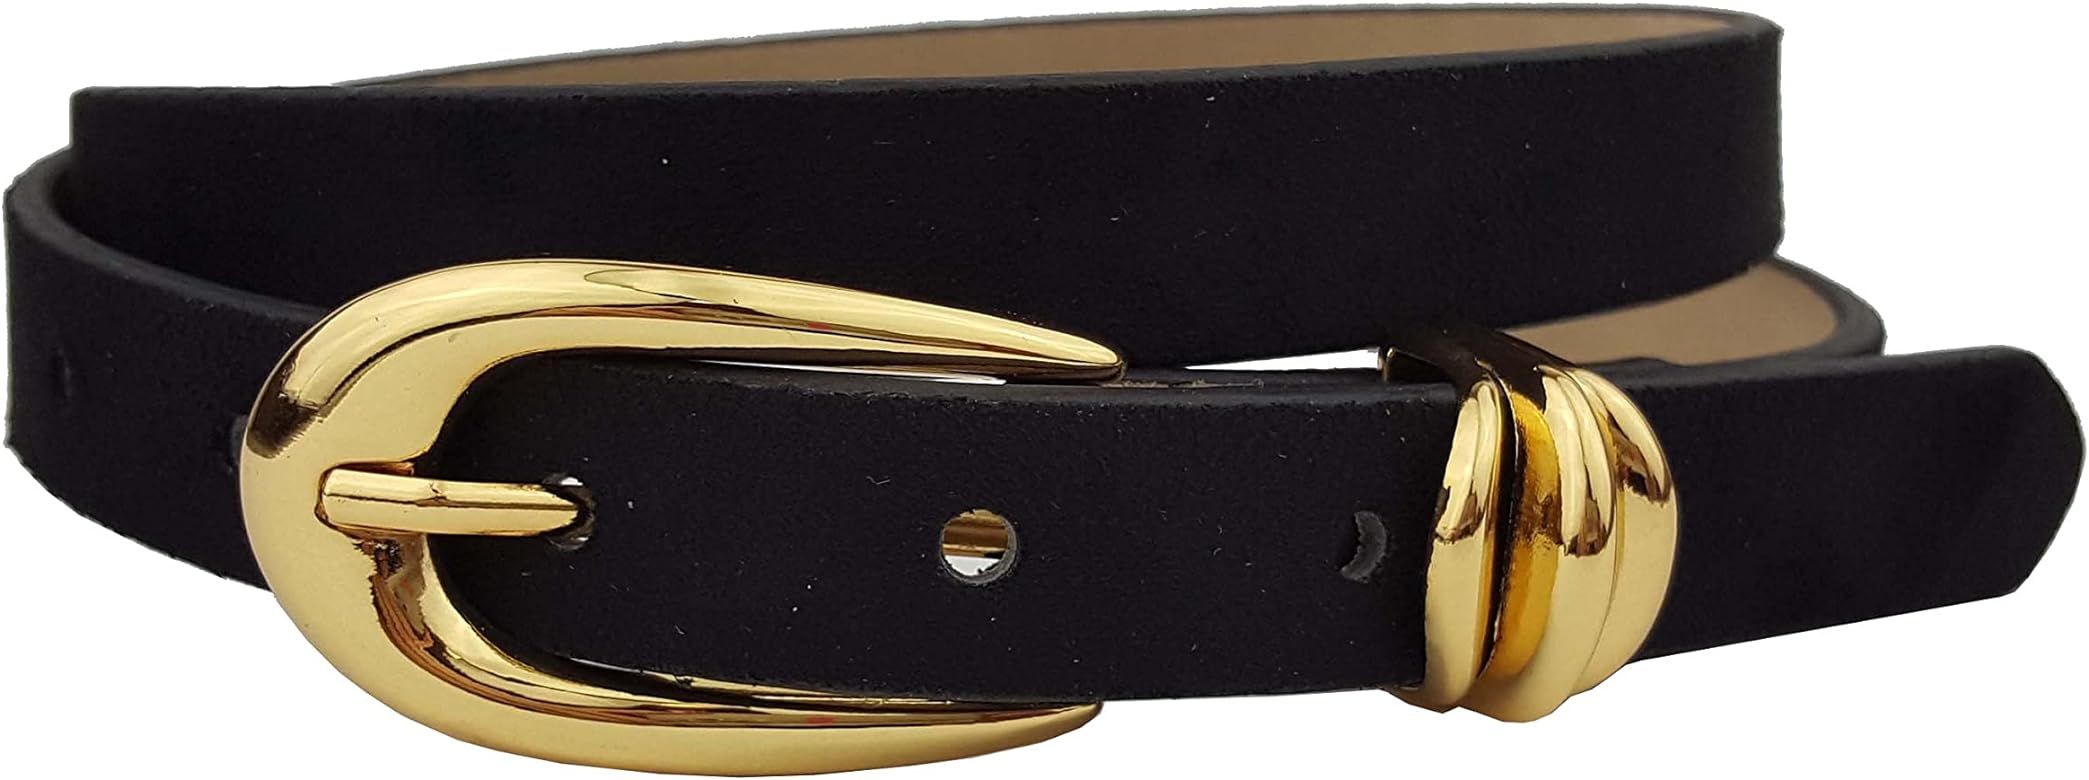 Microfiber Suede Belt w. Classic Skinny Gold Buckle and Loop | Amazon (US)